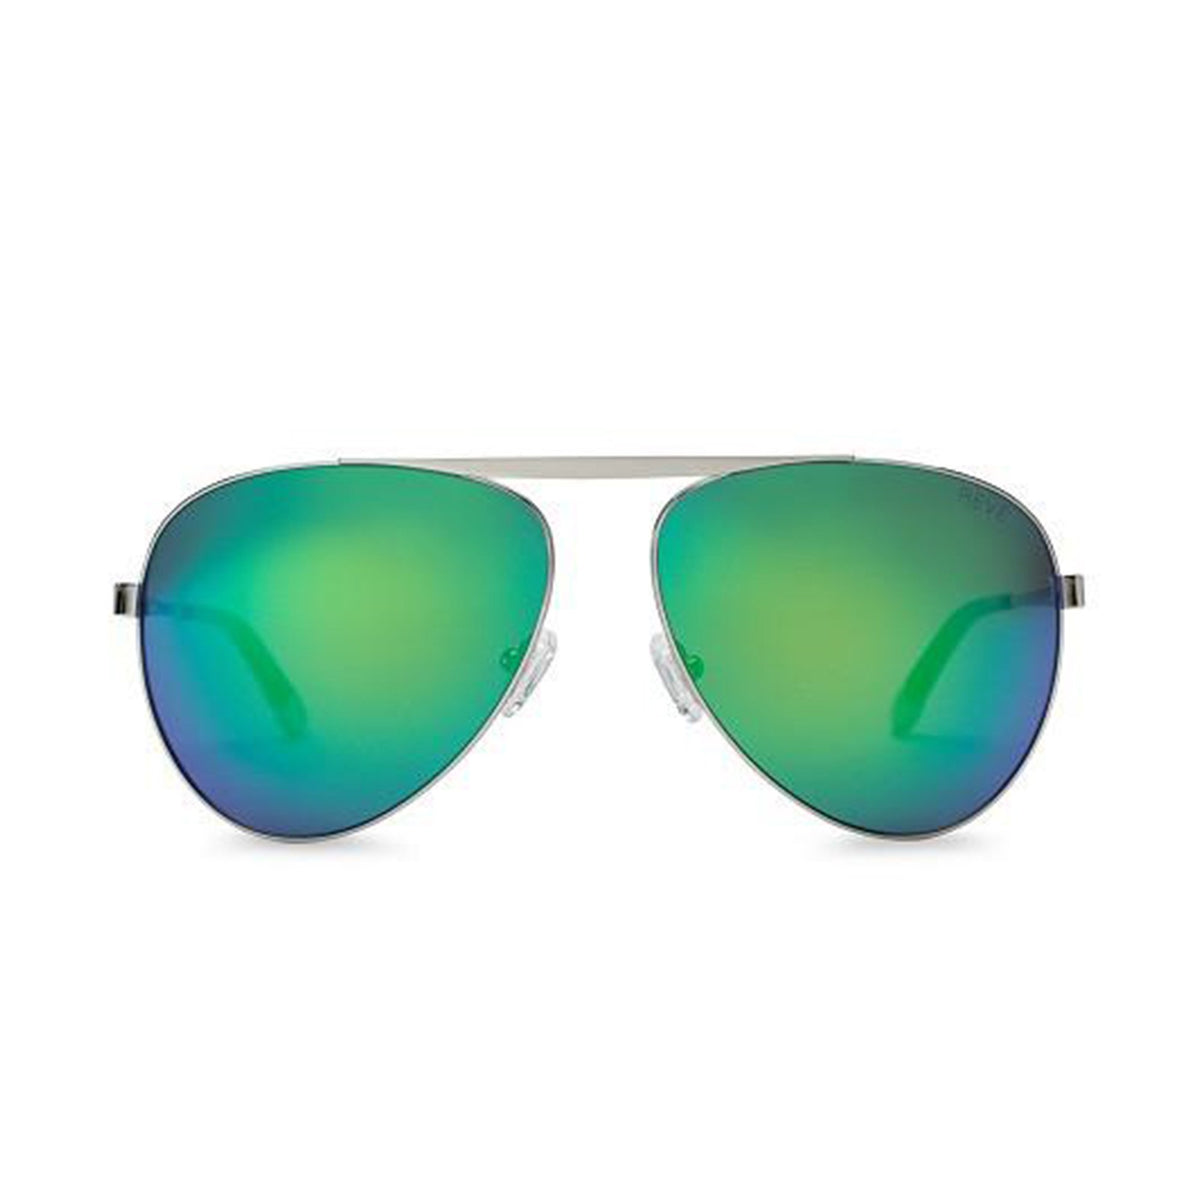 WISH YOU WERE HERE | GREEN ENVY aviator sunglasses with mirrored lenses